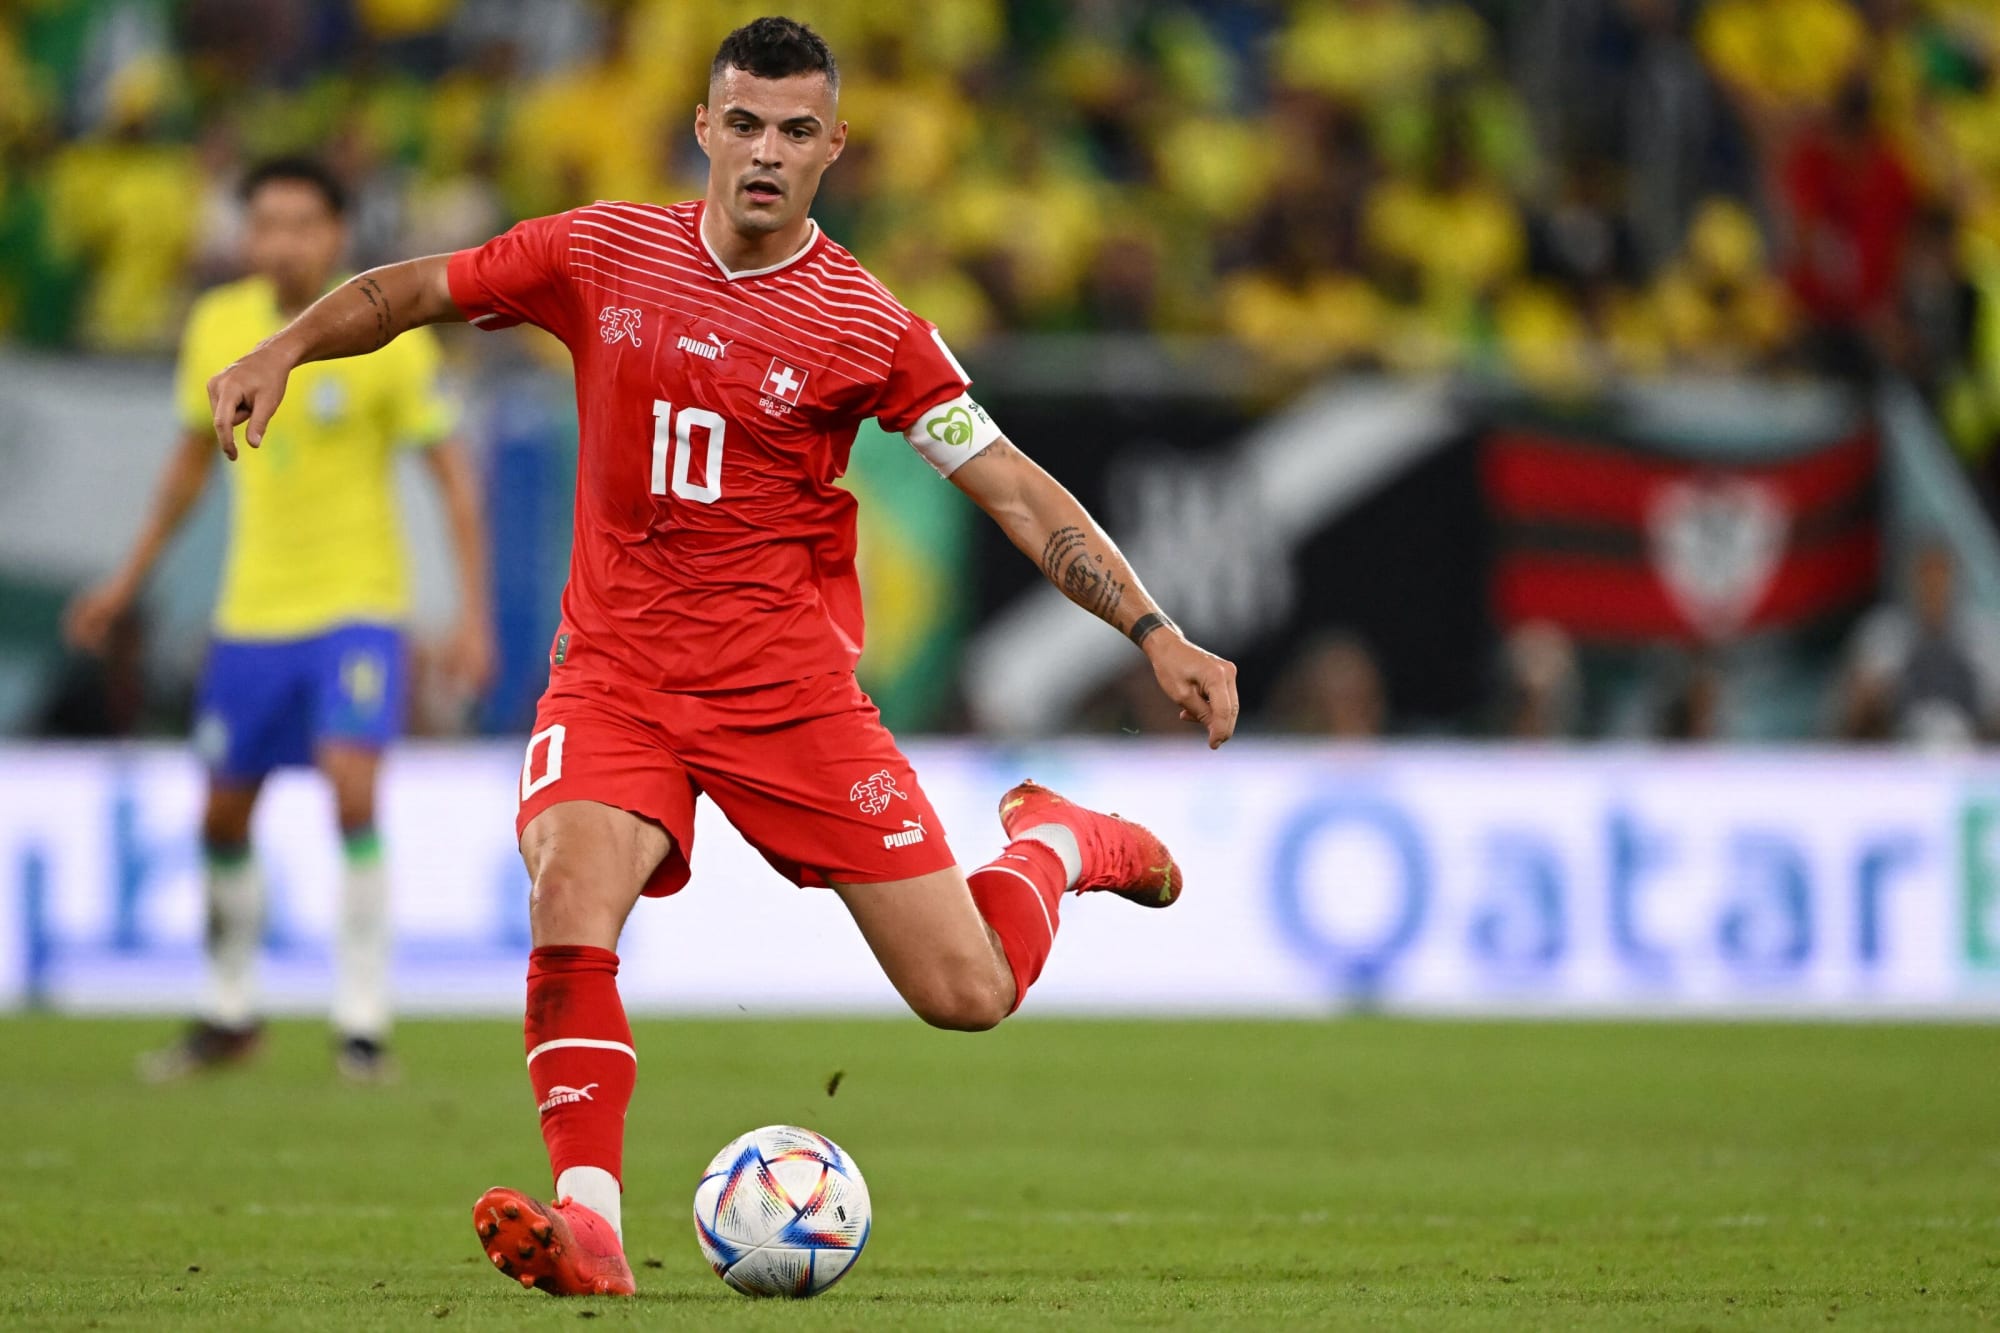 Granit Xhaka’s performance vs Brazil will give Mikel Arteta something to think about